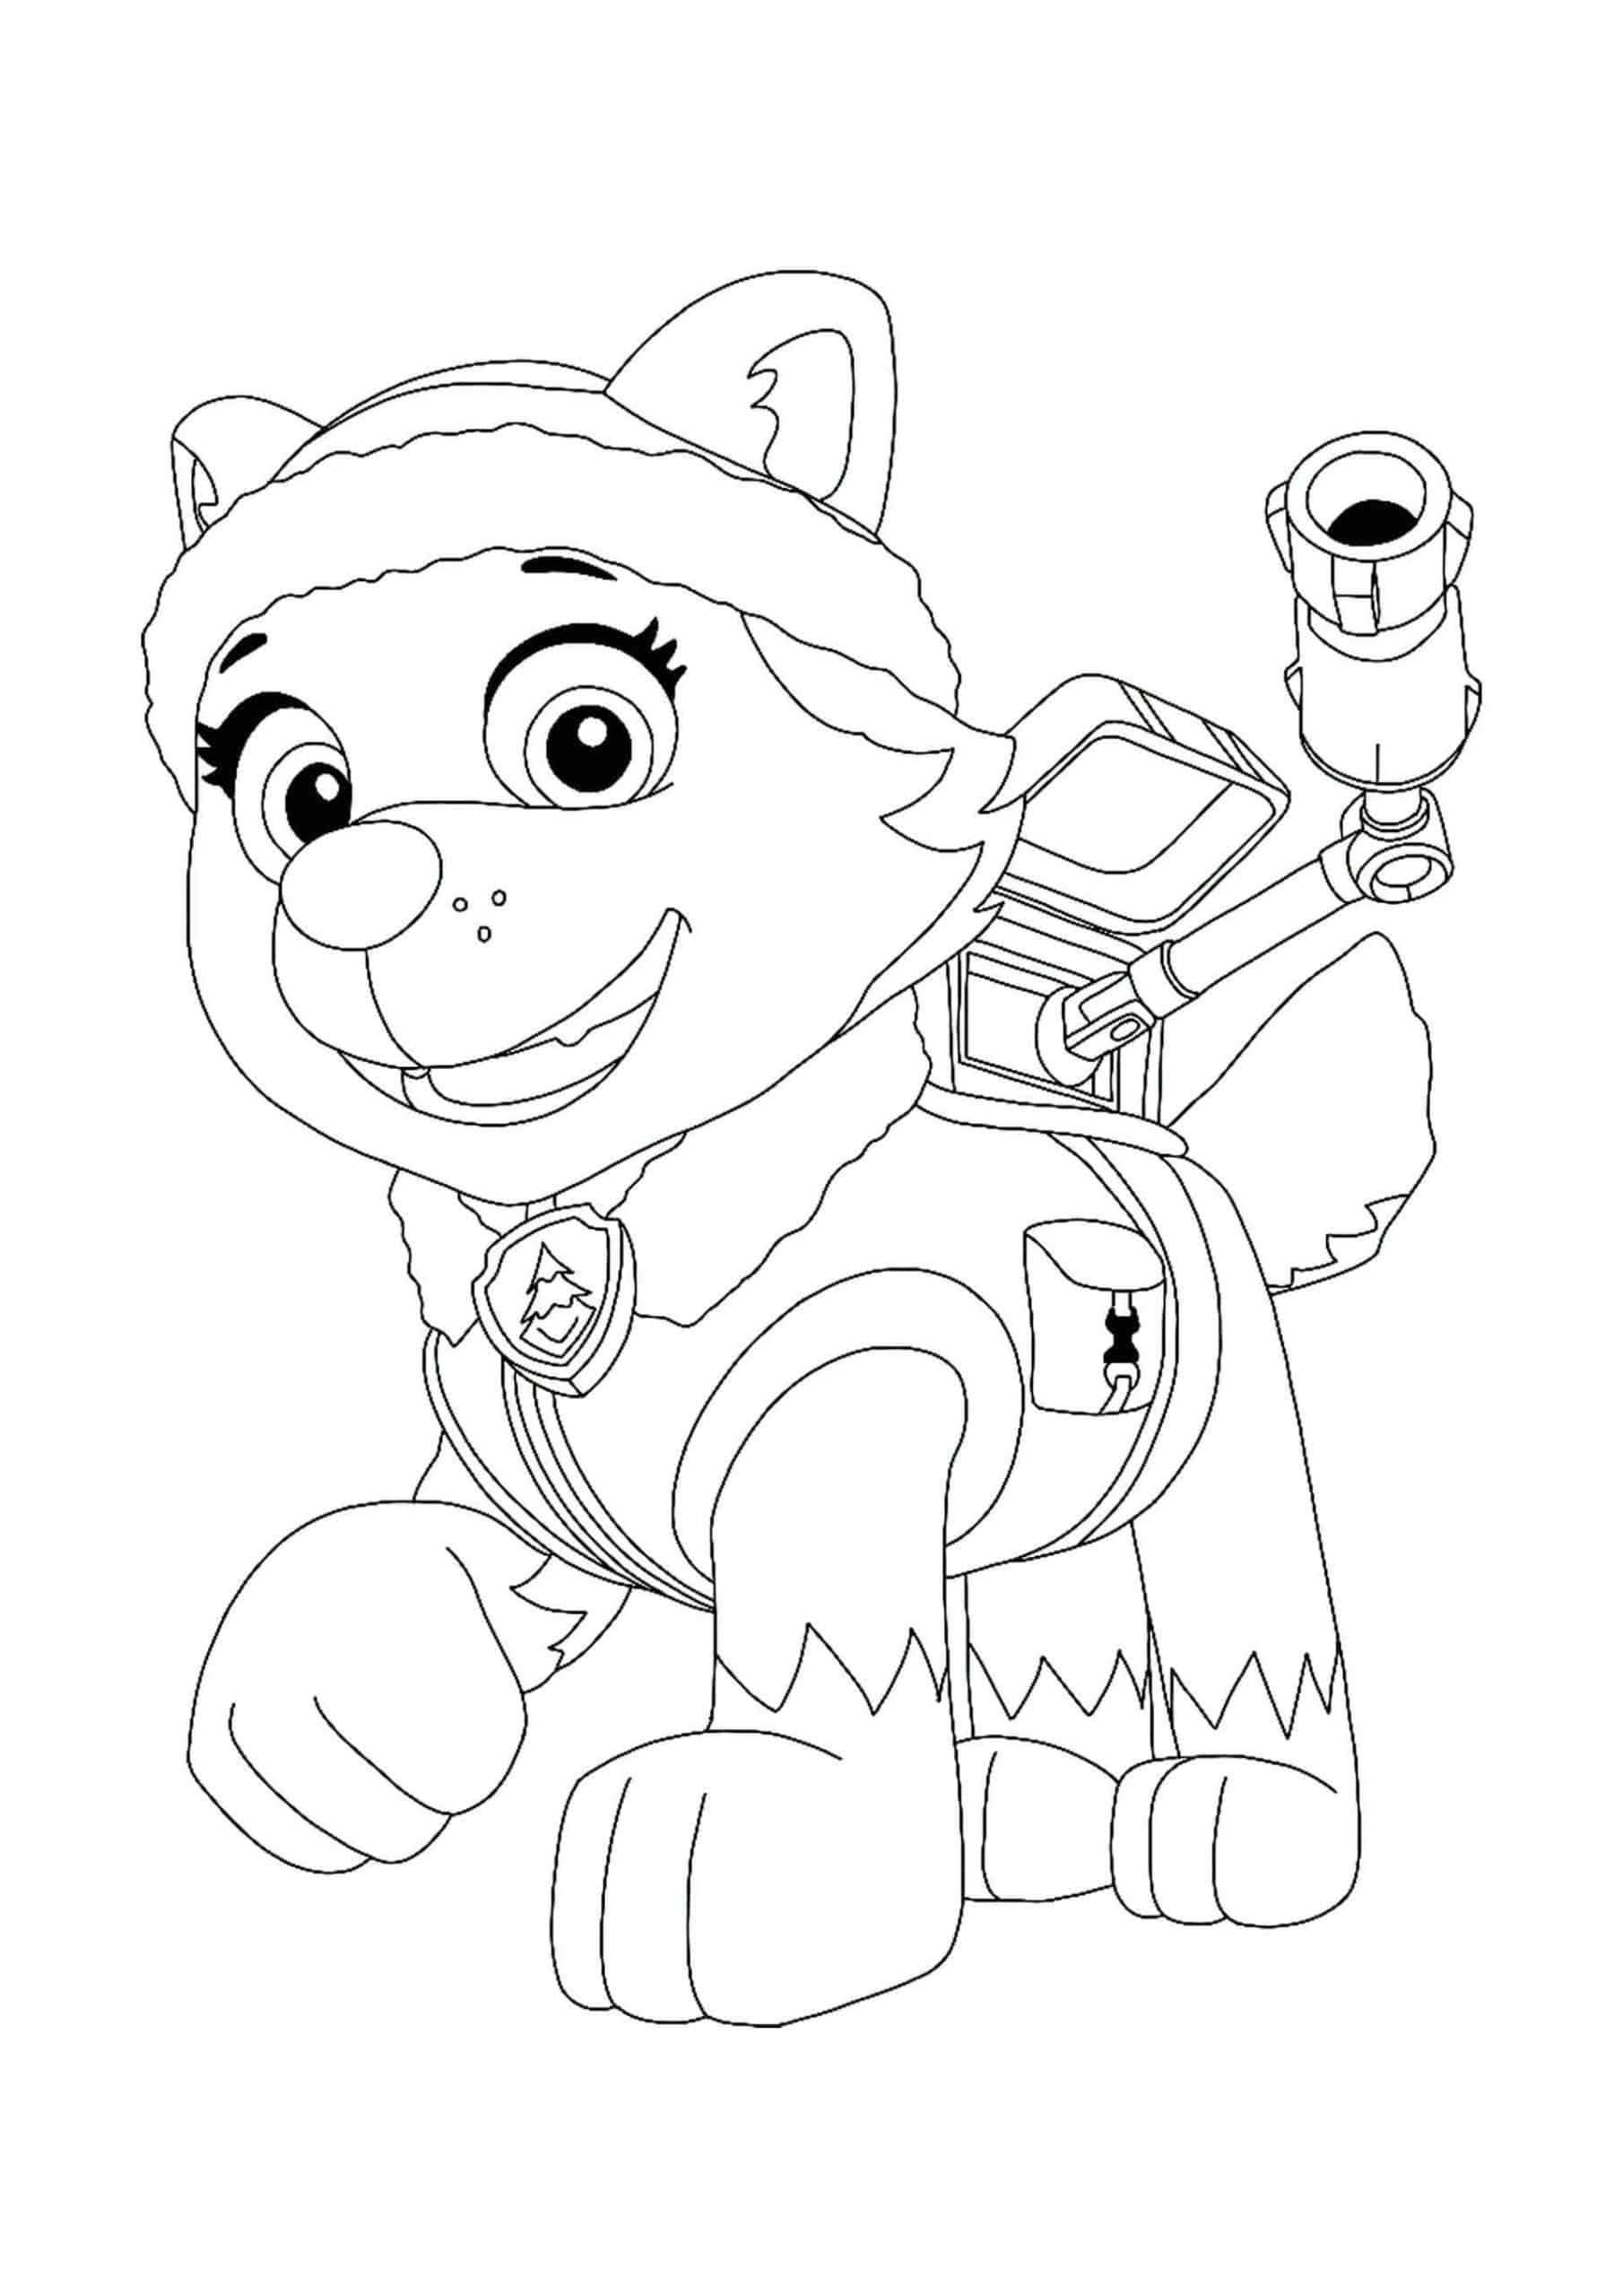 paw-patrol-everest-coloring-pages-4-free-printable-coloring-sheets